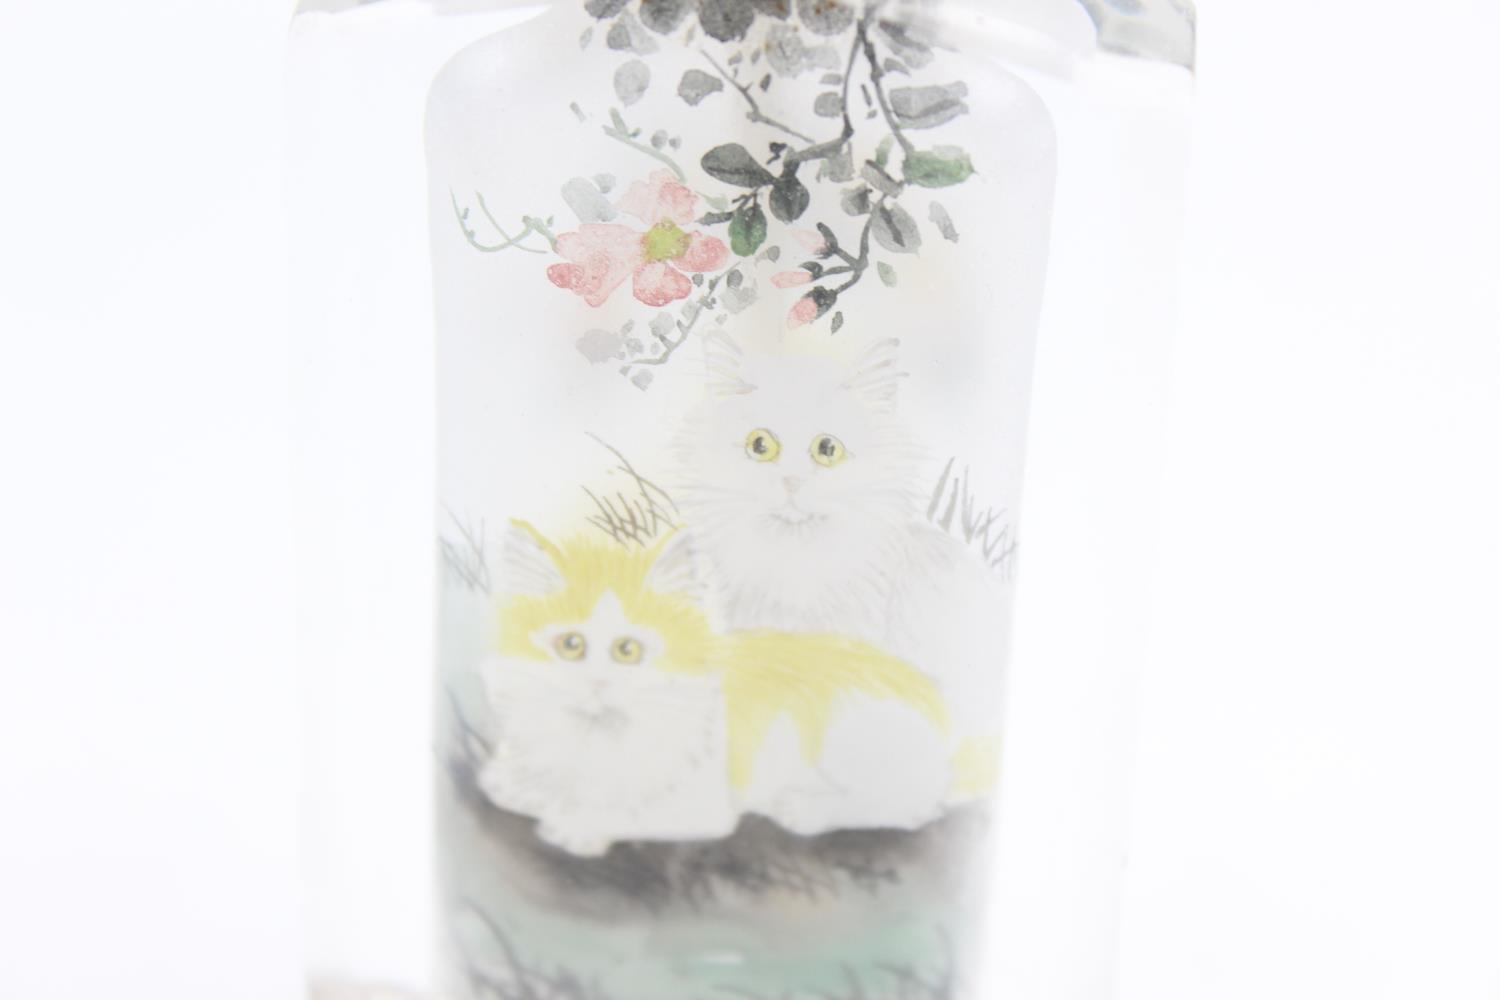 Antique Reverse Painted Glass SNUFF BOTTLE Cats with Dipper Scoop, Silver Topped - Bild 2 aus 5